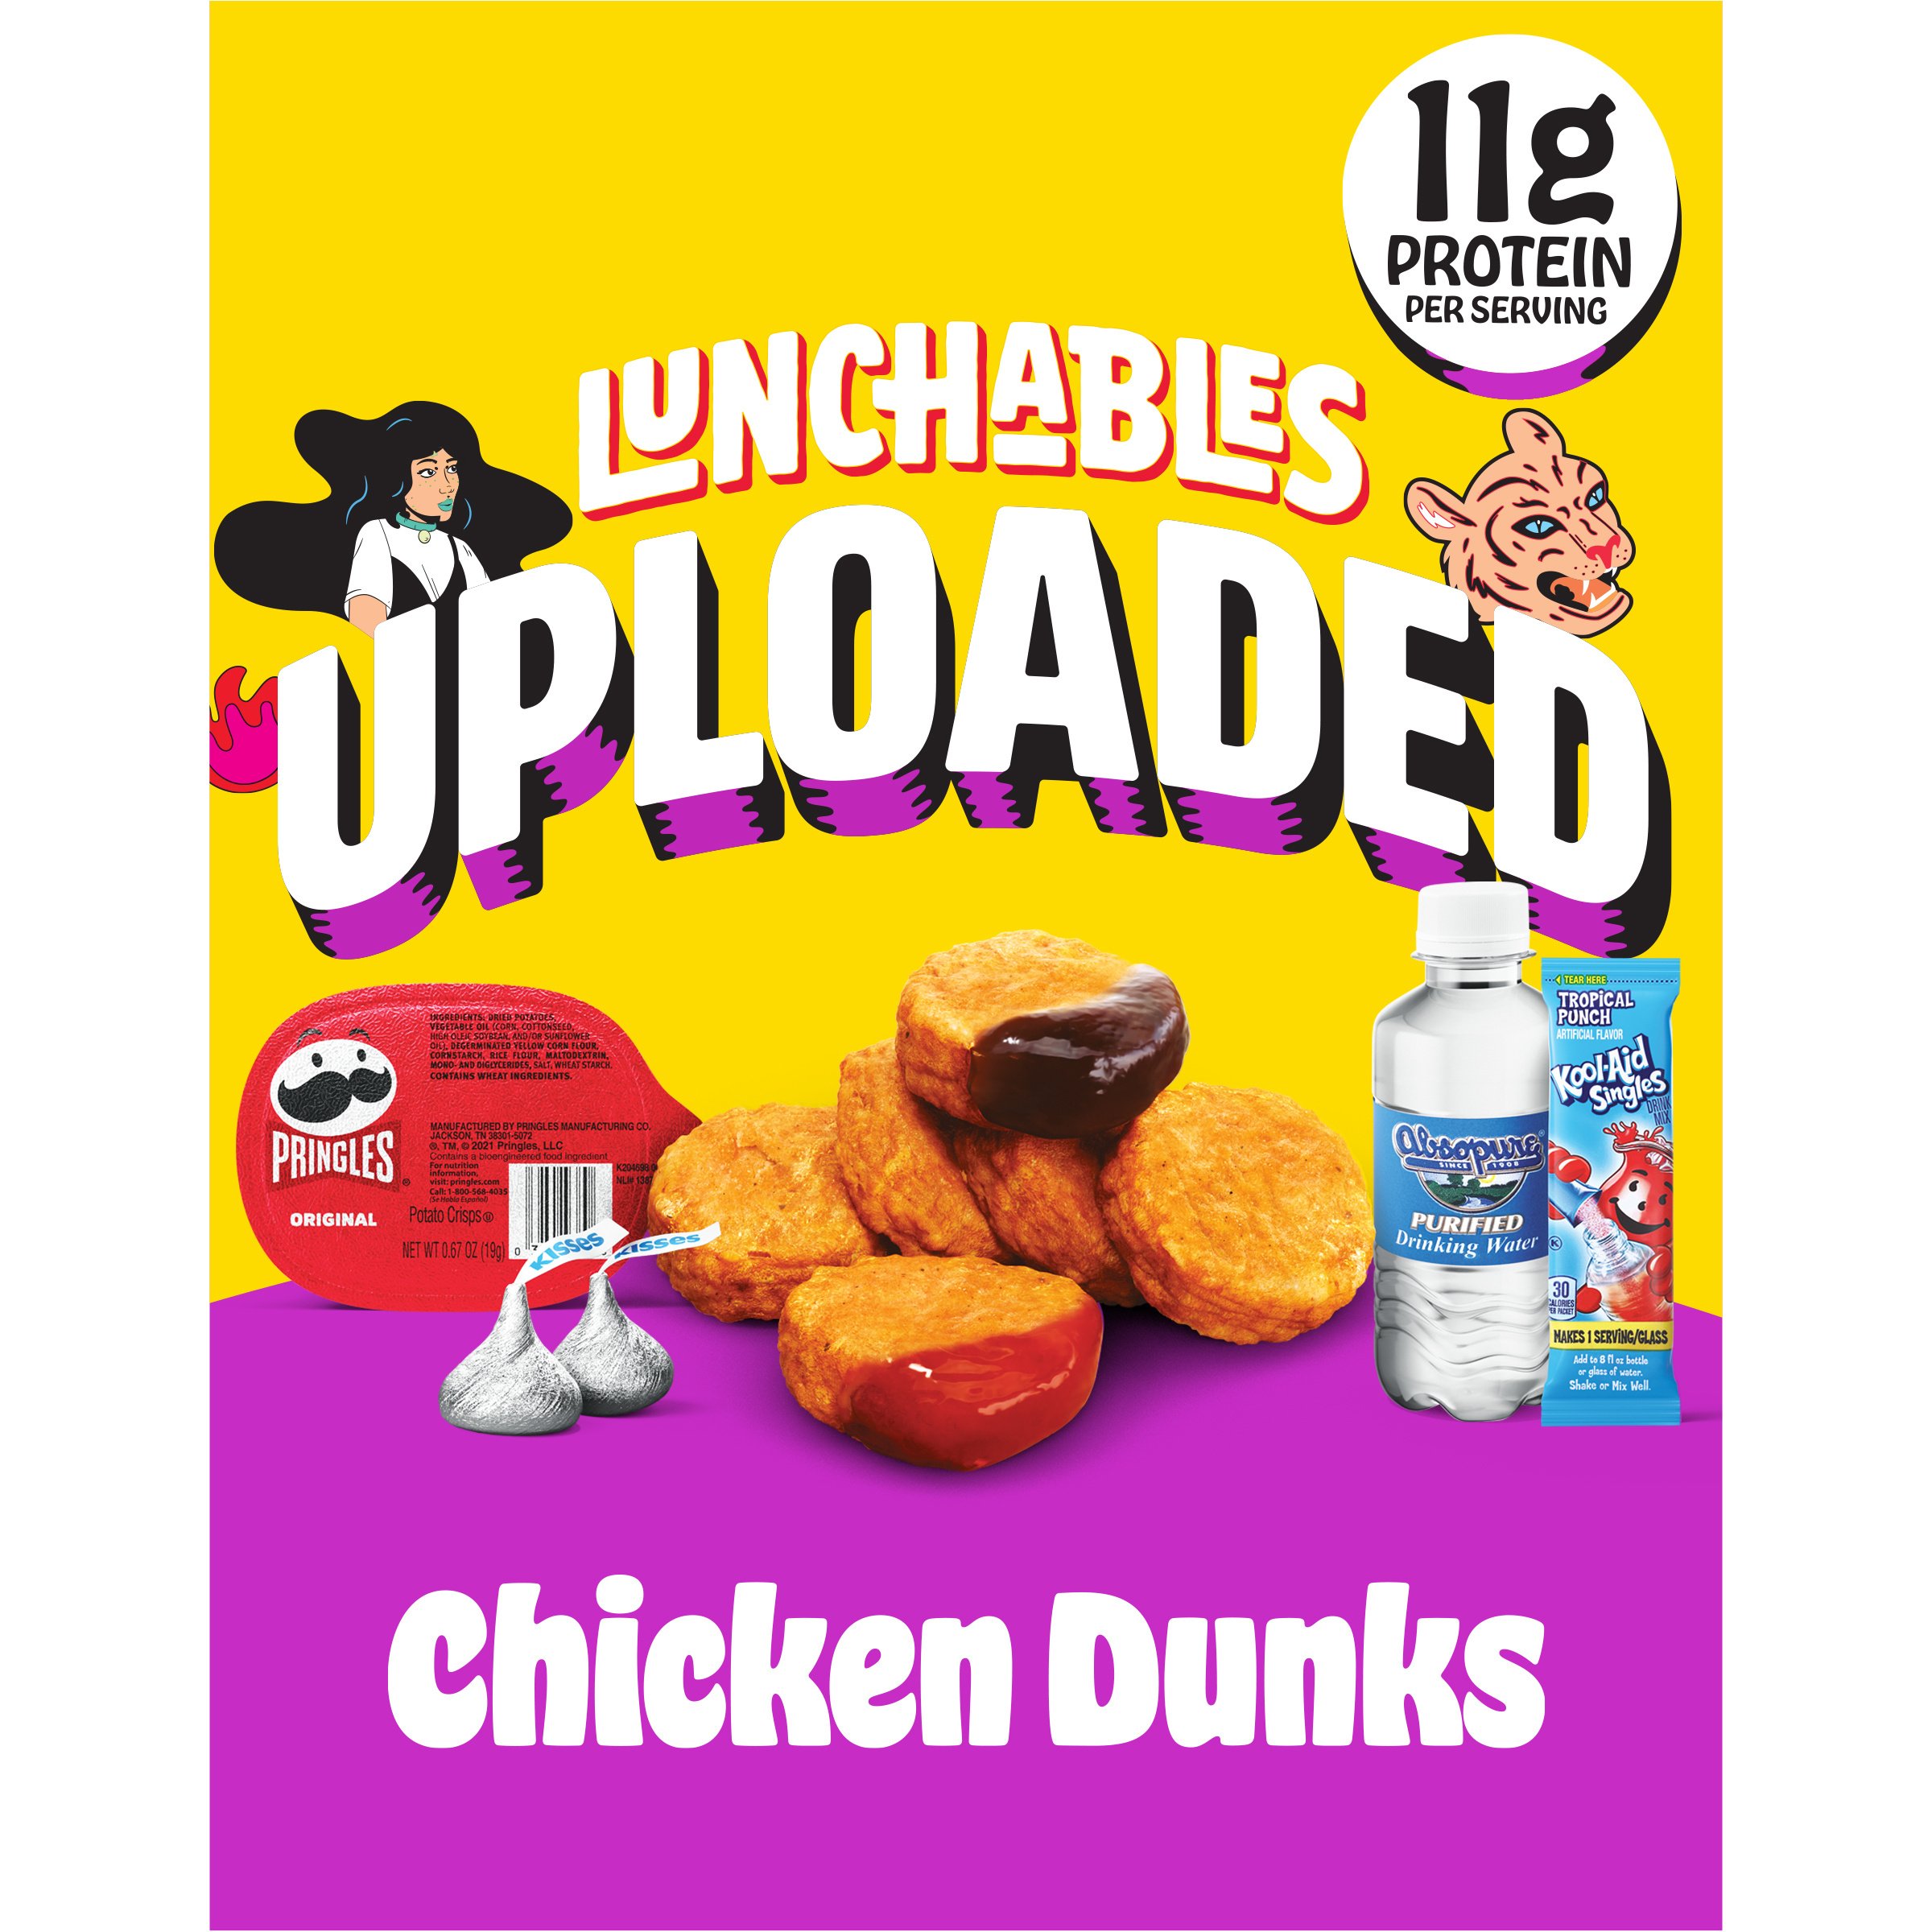 Lunchables Uploaded Meal Kit - Chicken Dunks - Shop Snack Trays at H-E-B